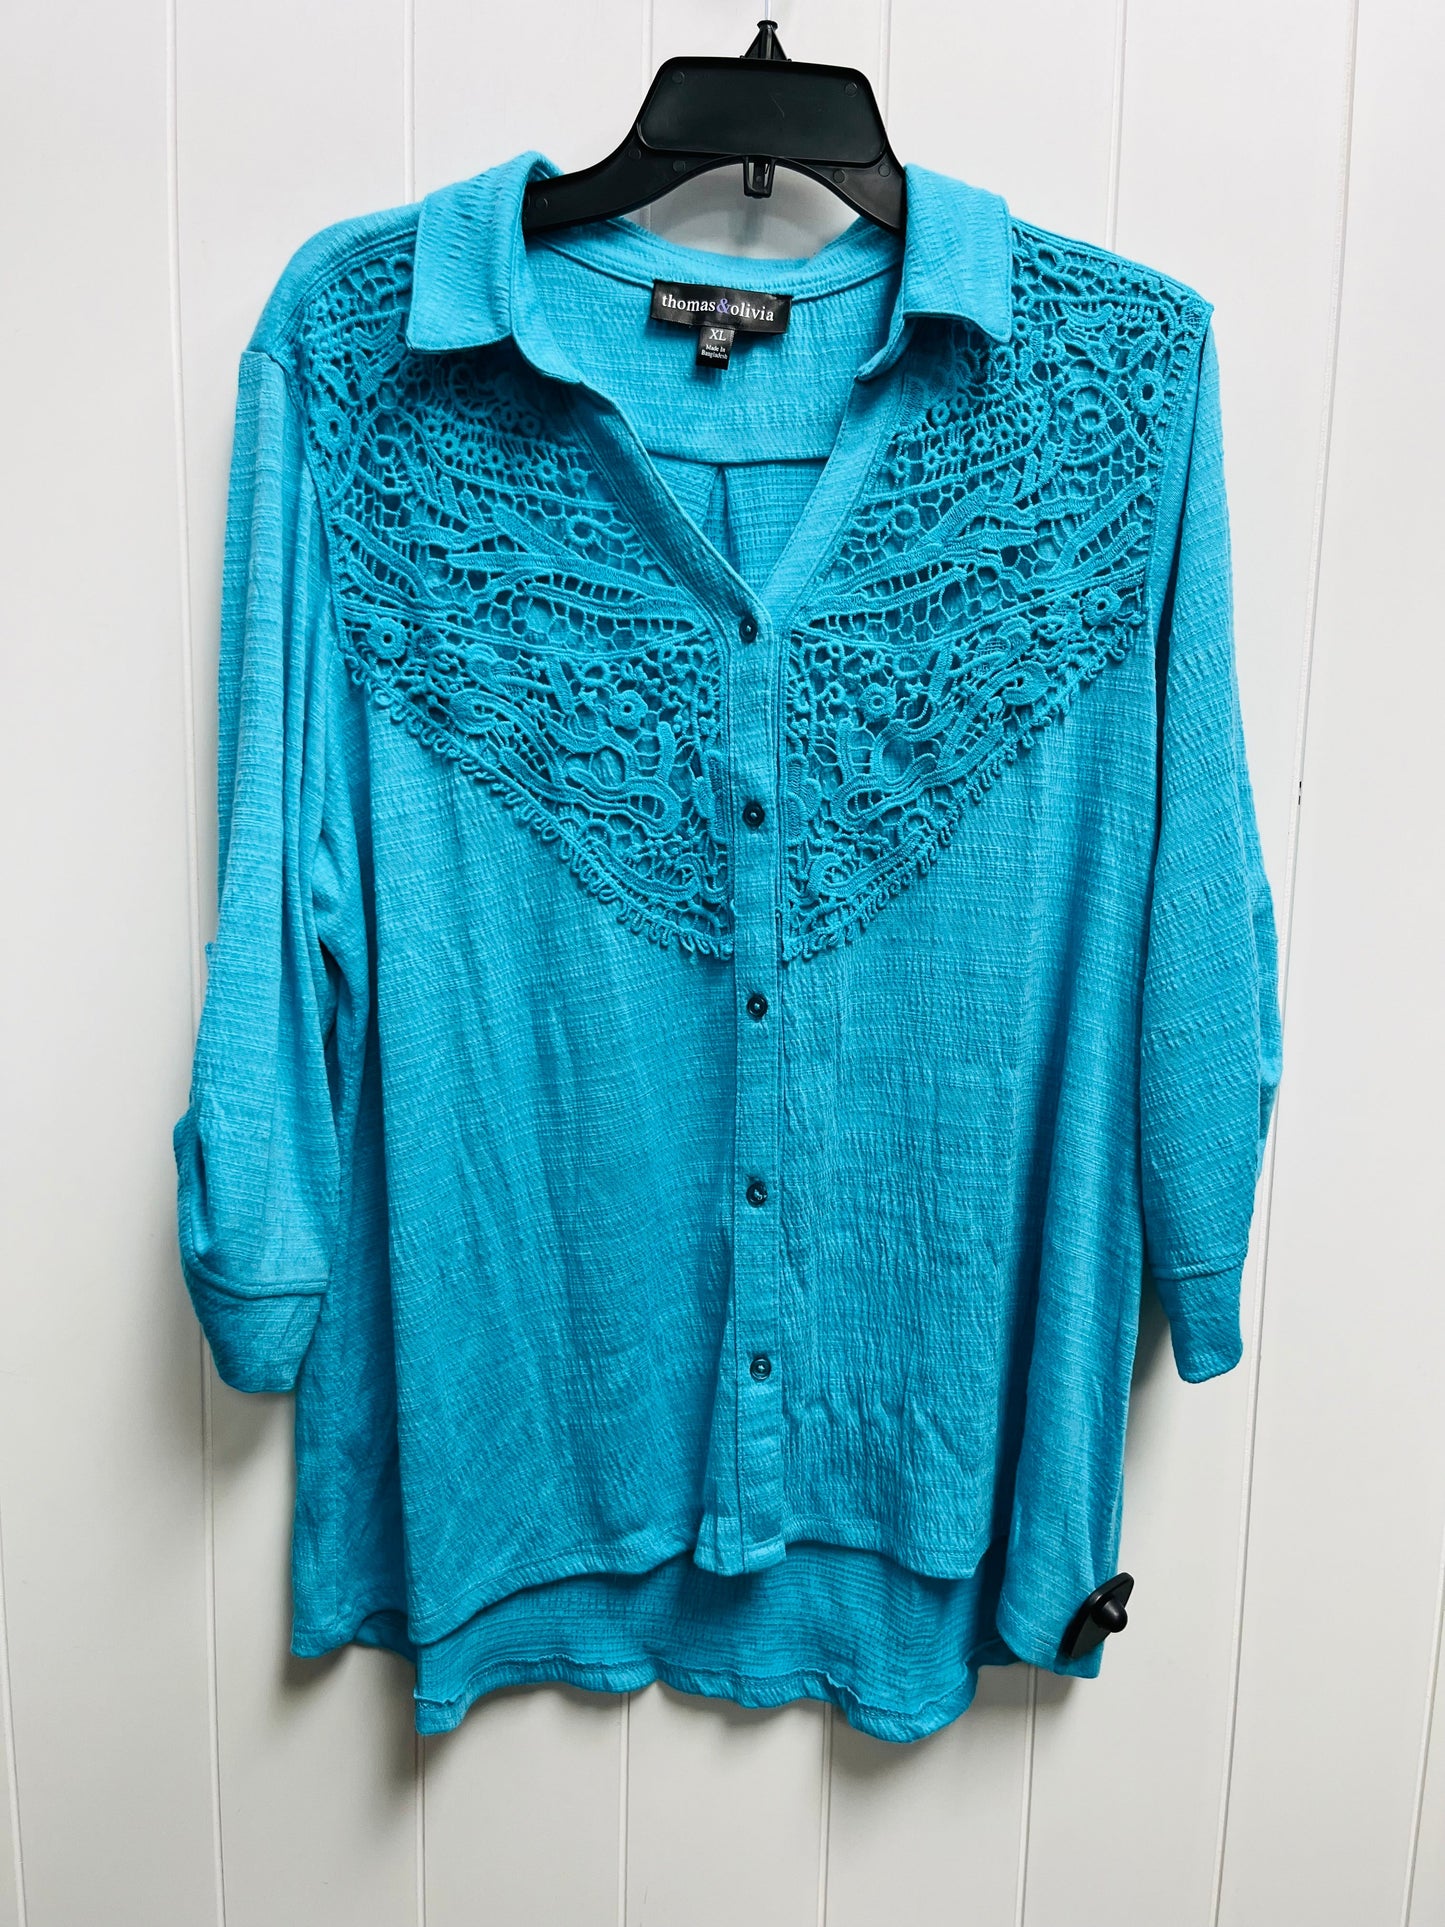 Top Long Sleeve By THOMAS & OLIVIA -  Size: Xl